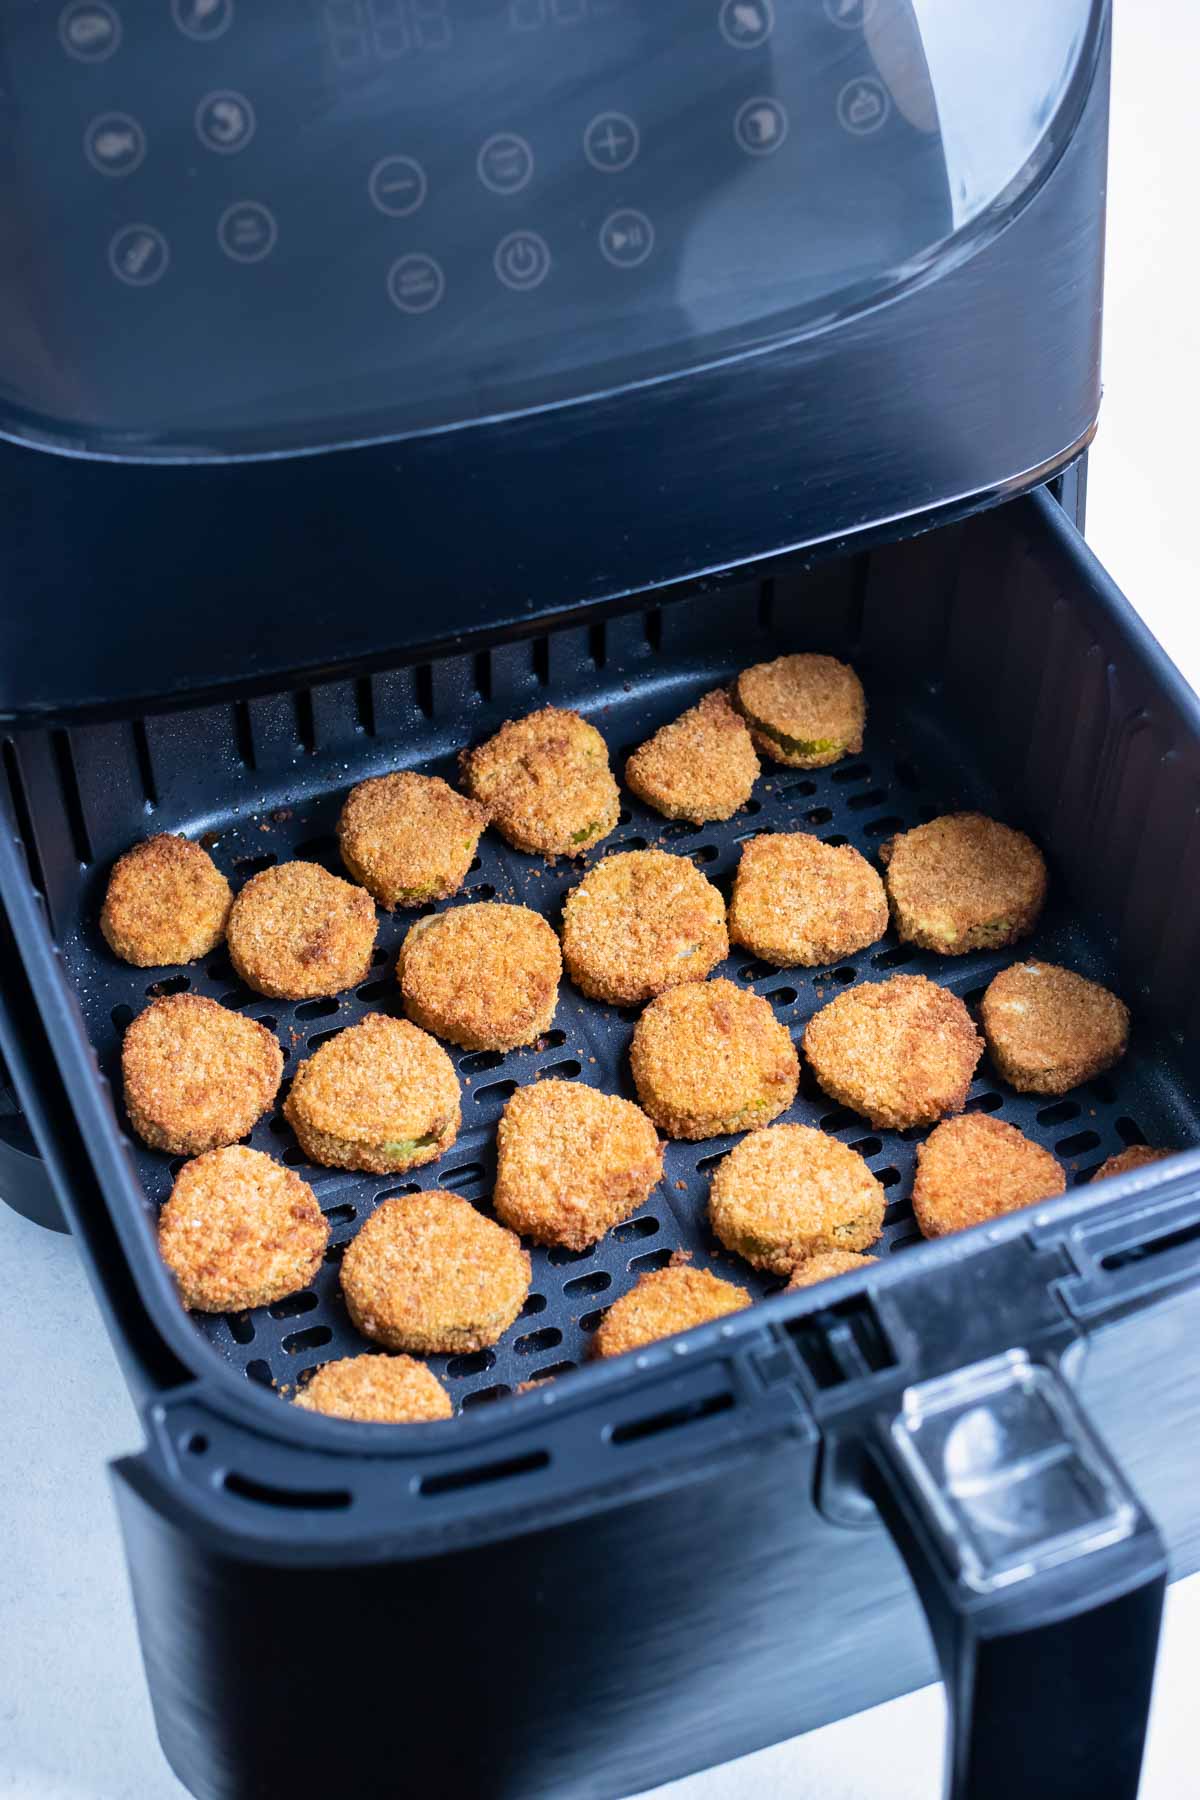 The crispy pickles are cooked in the air fryer until golden brown.